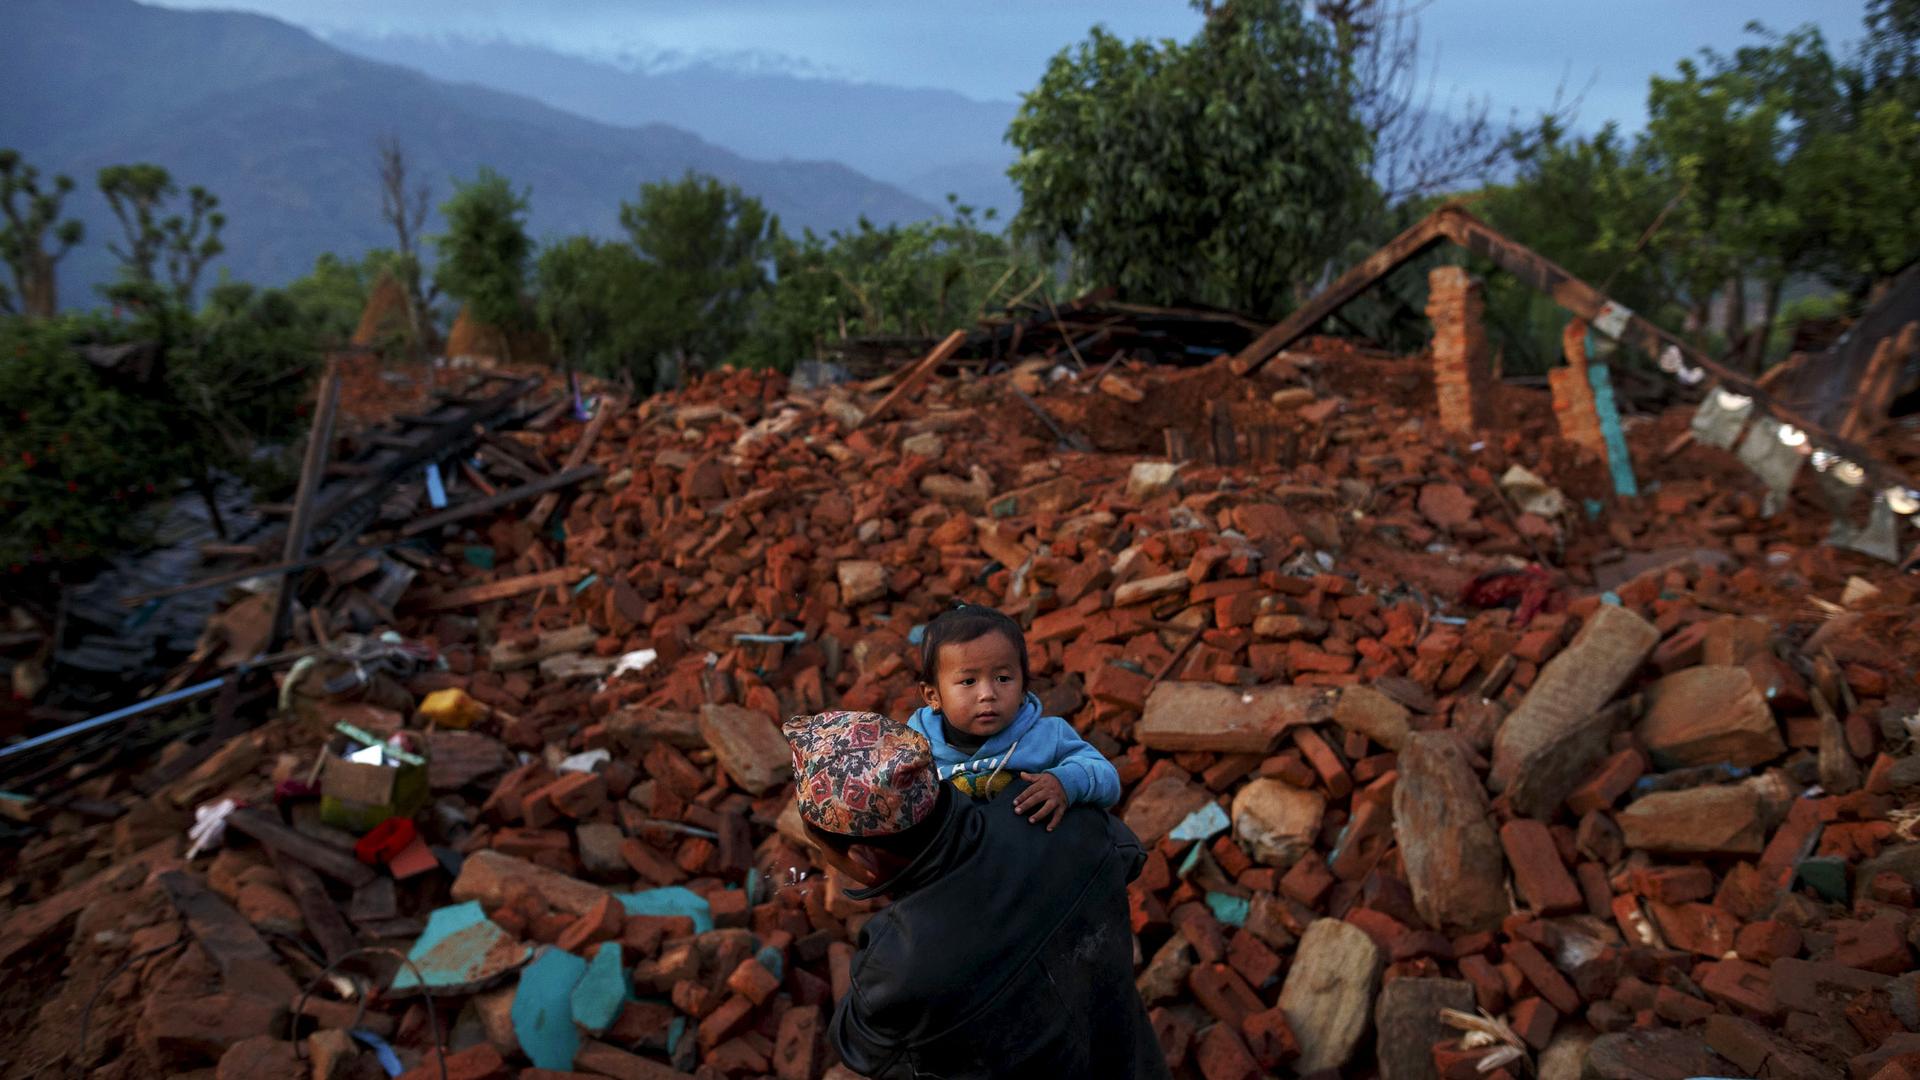 A villager carries a child amid debris in Gorkha, Nepal, following the earthquake that struck Nepal on April 25, 2015.